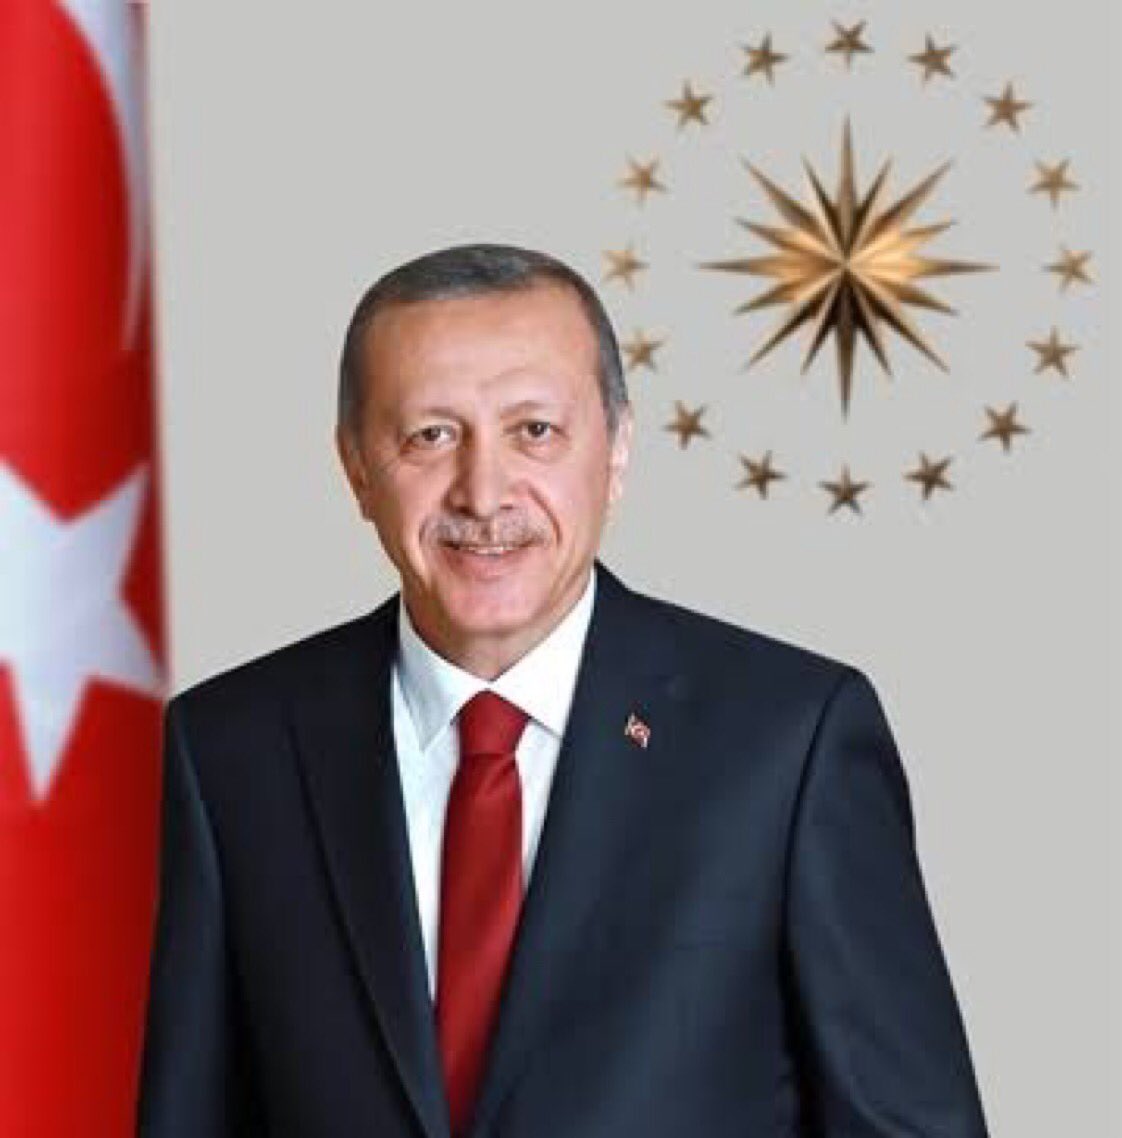 On behalf of the International Human Rights Commission as IGO, I sent official condolences to Excellency President @RTErdogan on the great losses due to Earthquake. I will travel to Turkiya to show our solidarity with our brotherly people. It's time to #stand with each other.